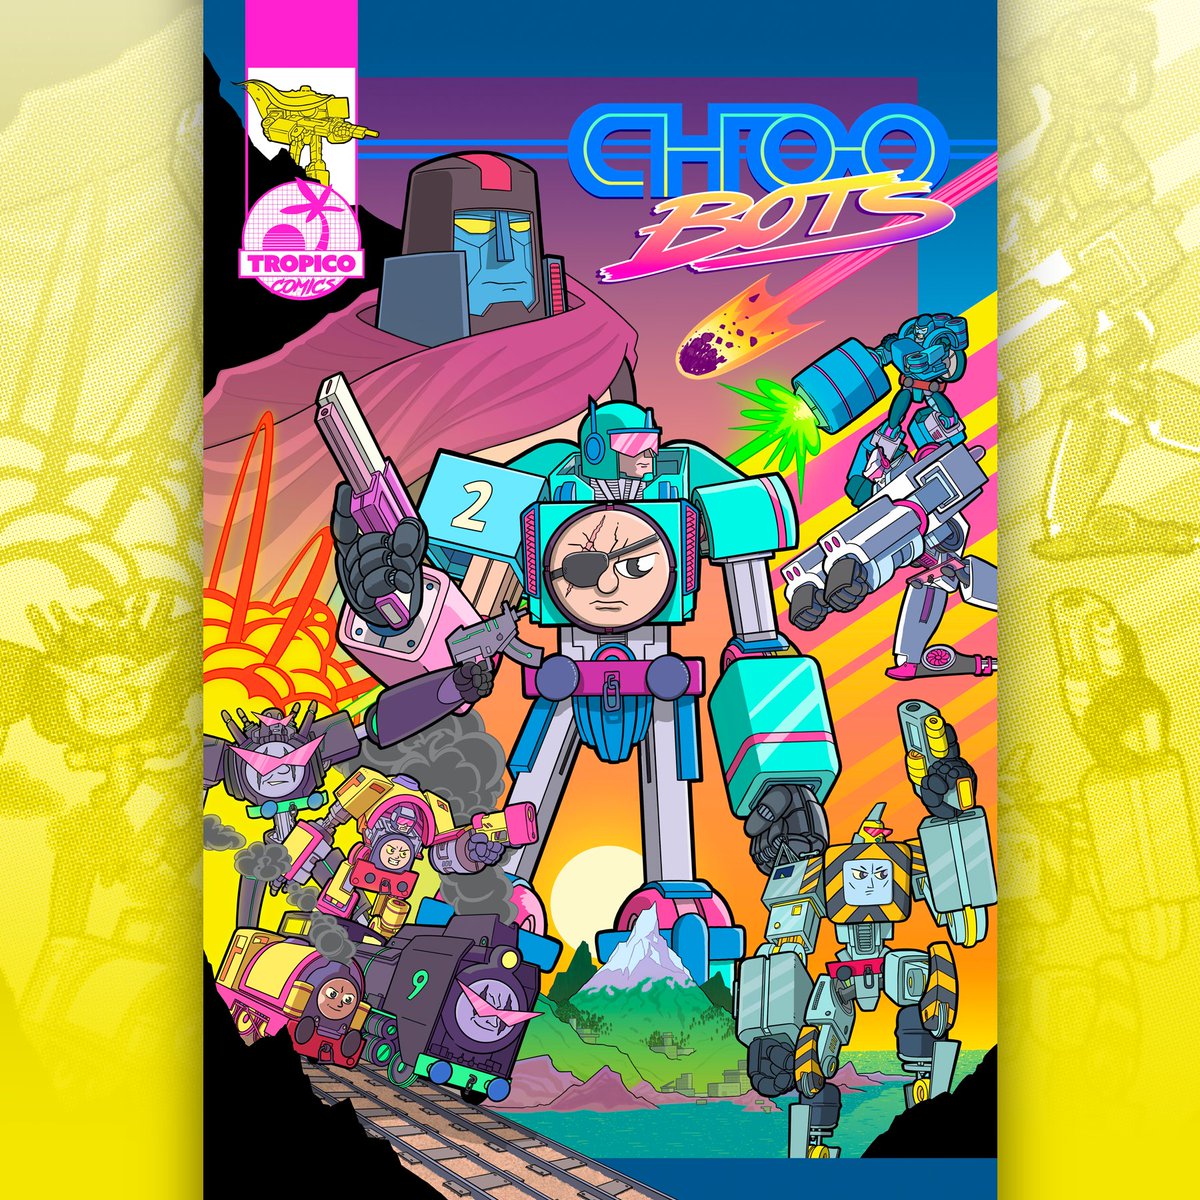 The cover to my new comic, Choo Bots! I am super excited to finally put this project out on Kickstarter in the coming weeks! Sign up to be notified on launch here: kickstarter.com/projects/danle… #comics #kickstarter #steamtrain #giantrobot #whatever #blahblah